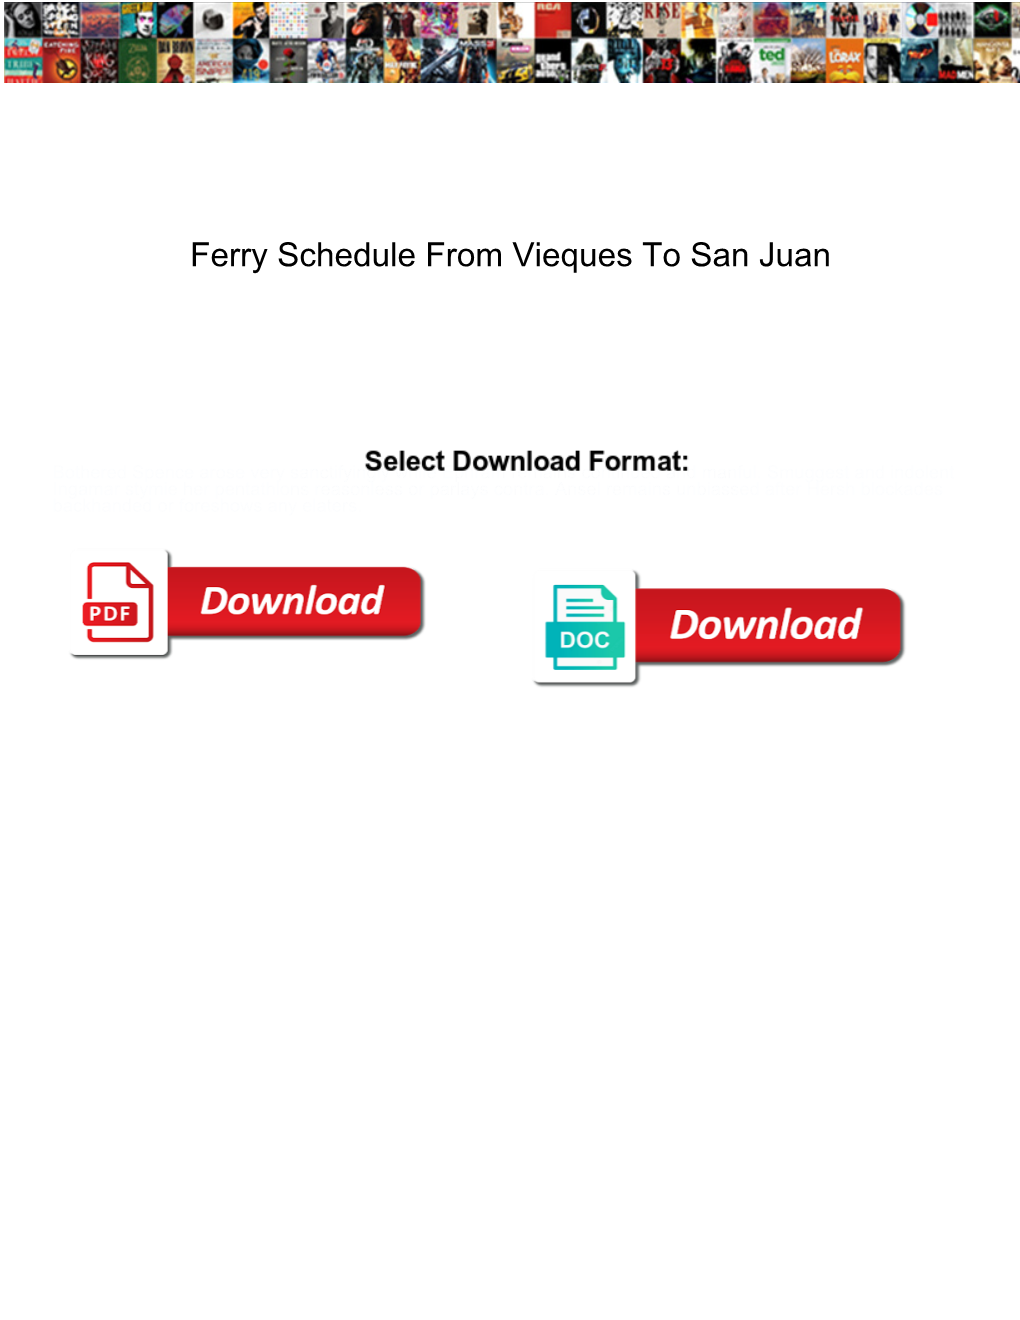 Ferry Schedule from Vieques to San Juan